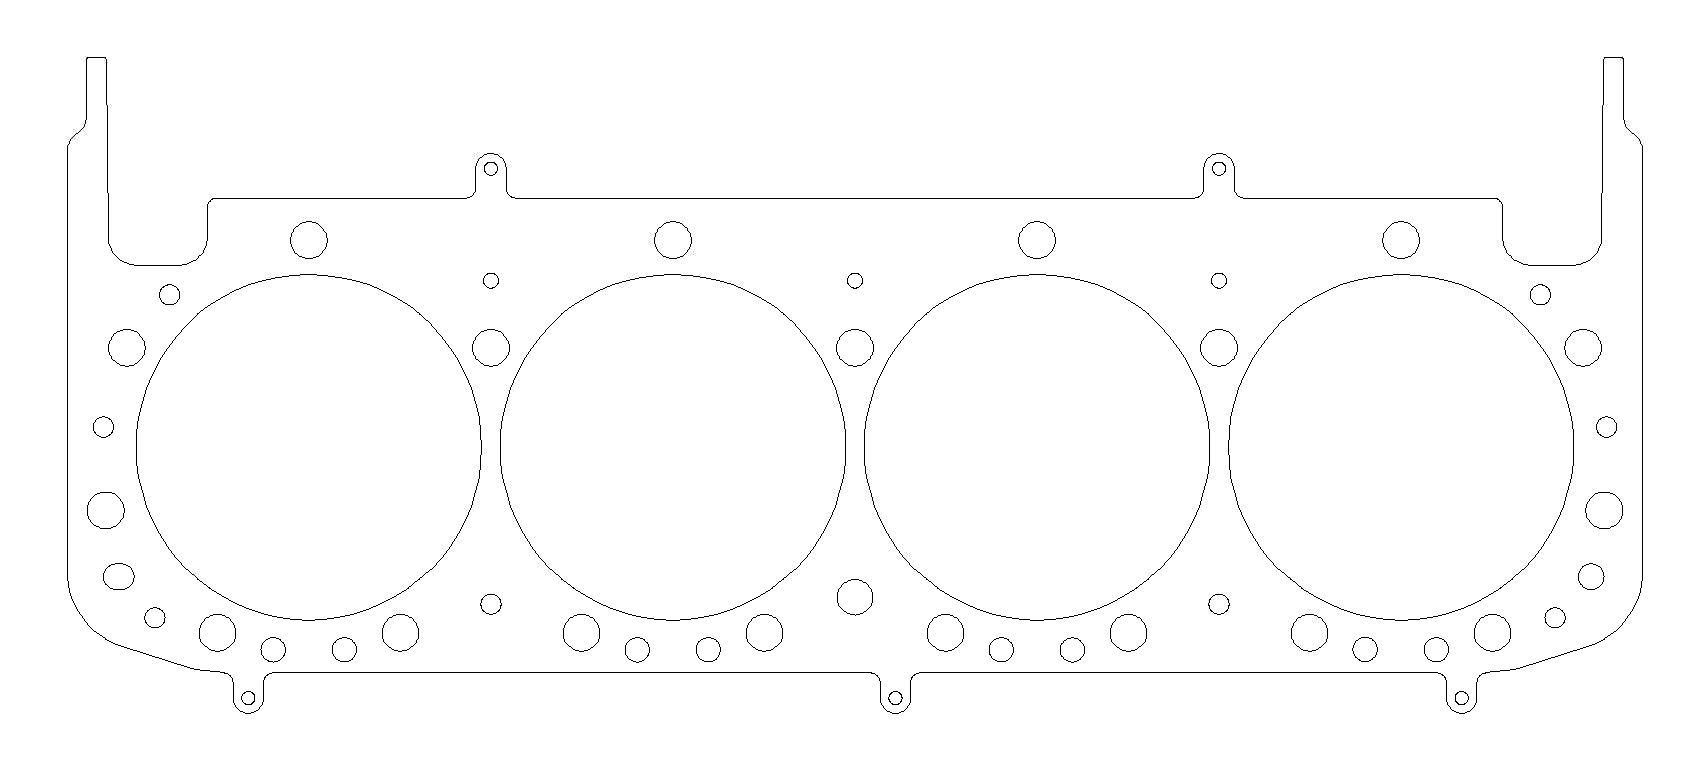 Cometic Gasket C5645-040 MLS .040 Thickness 4.040 Head Gasket for Small Block Chevy LT1 